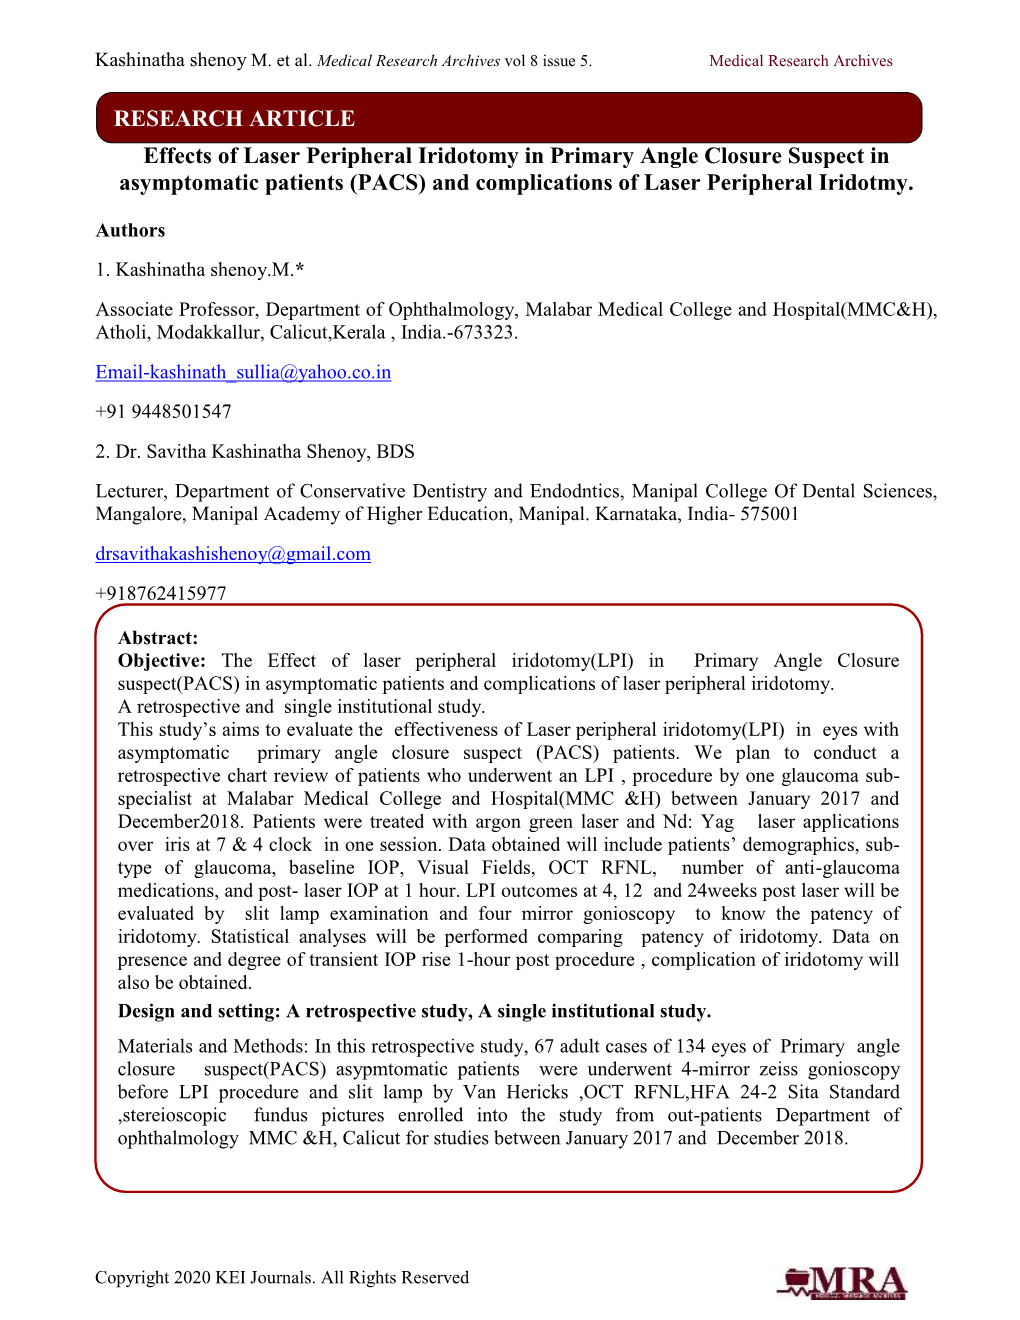 Effects of Laser Peripheral Iridotomy in Primary Angle Closure Suspect in Asymptomatic Patients (PACS) and Complications of Laser Peripheral Iridotmy